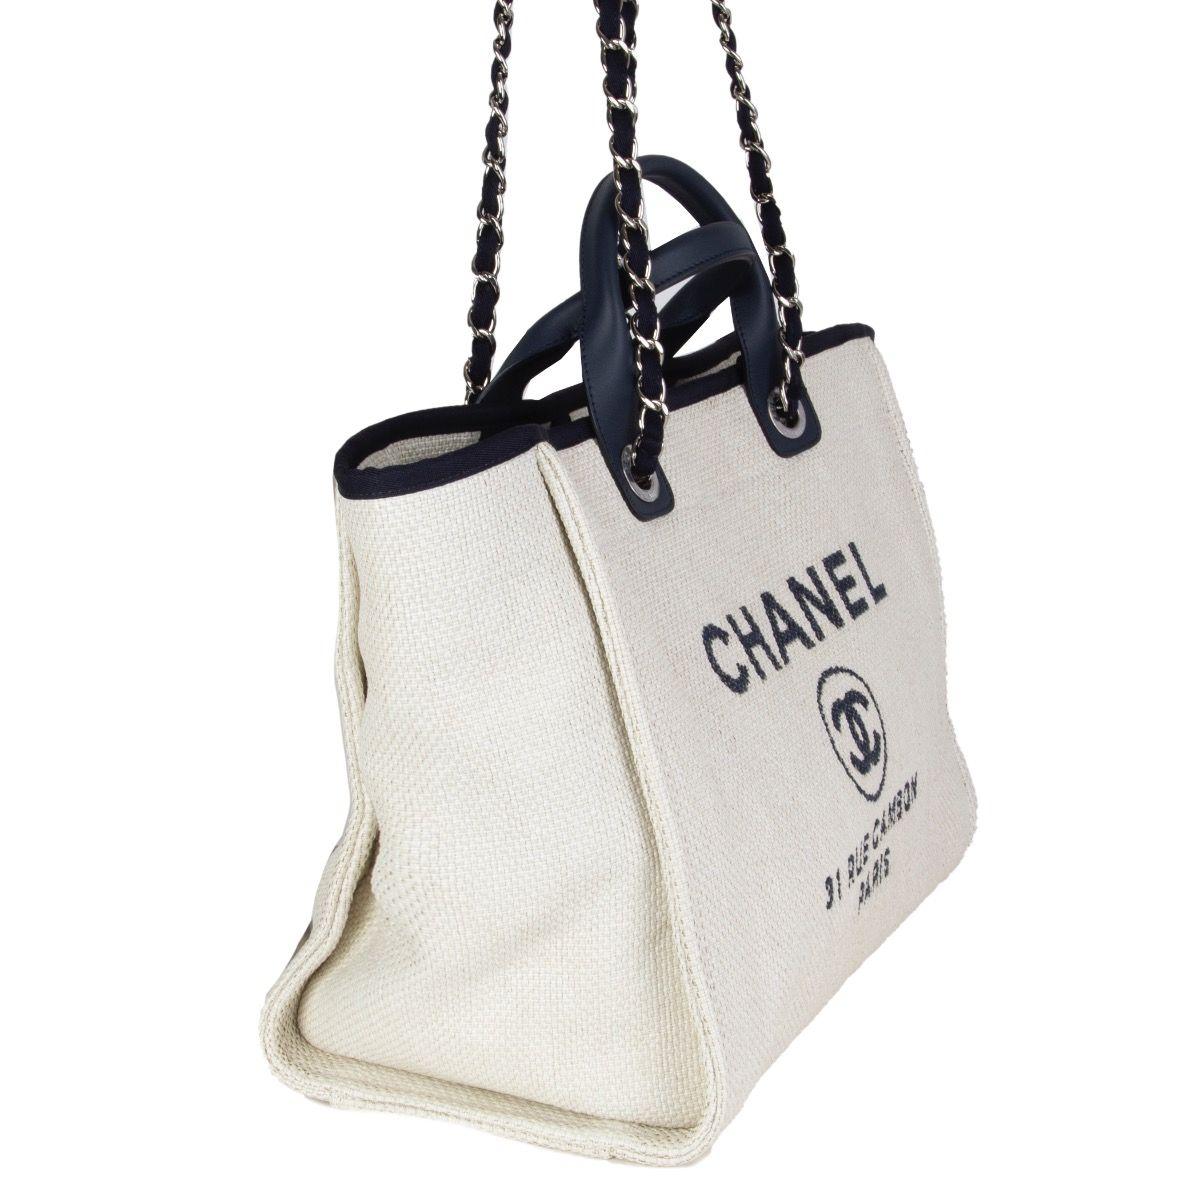 Chanel 'Deauville Large' shopper in white raffia and navy blue leather. Closes with a magnetic-snap on top. Lined in dark blue cotton with two open pockets against the front and a zipper pocket against the back. Has been carried and is in excellent